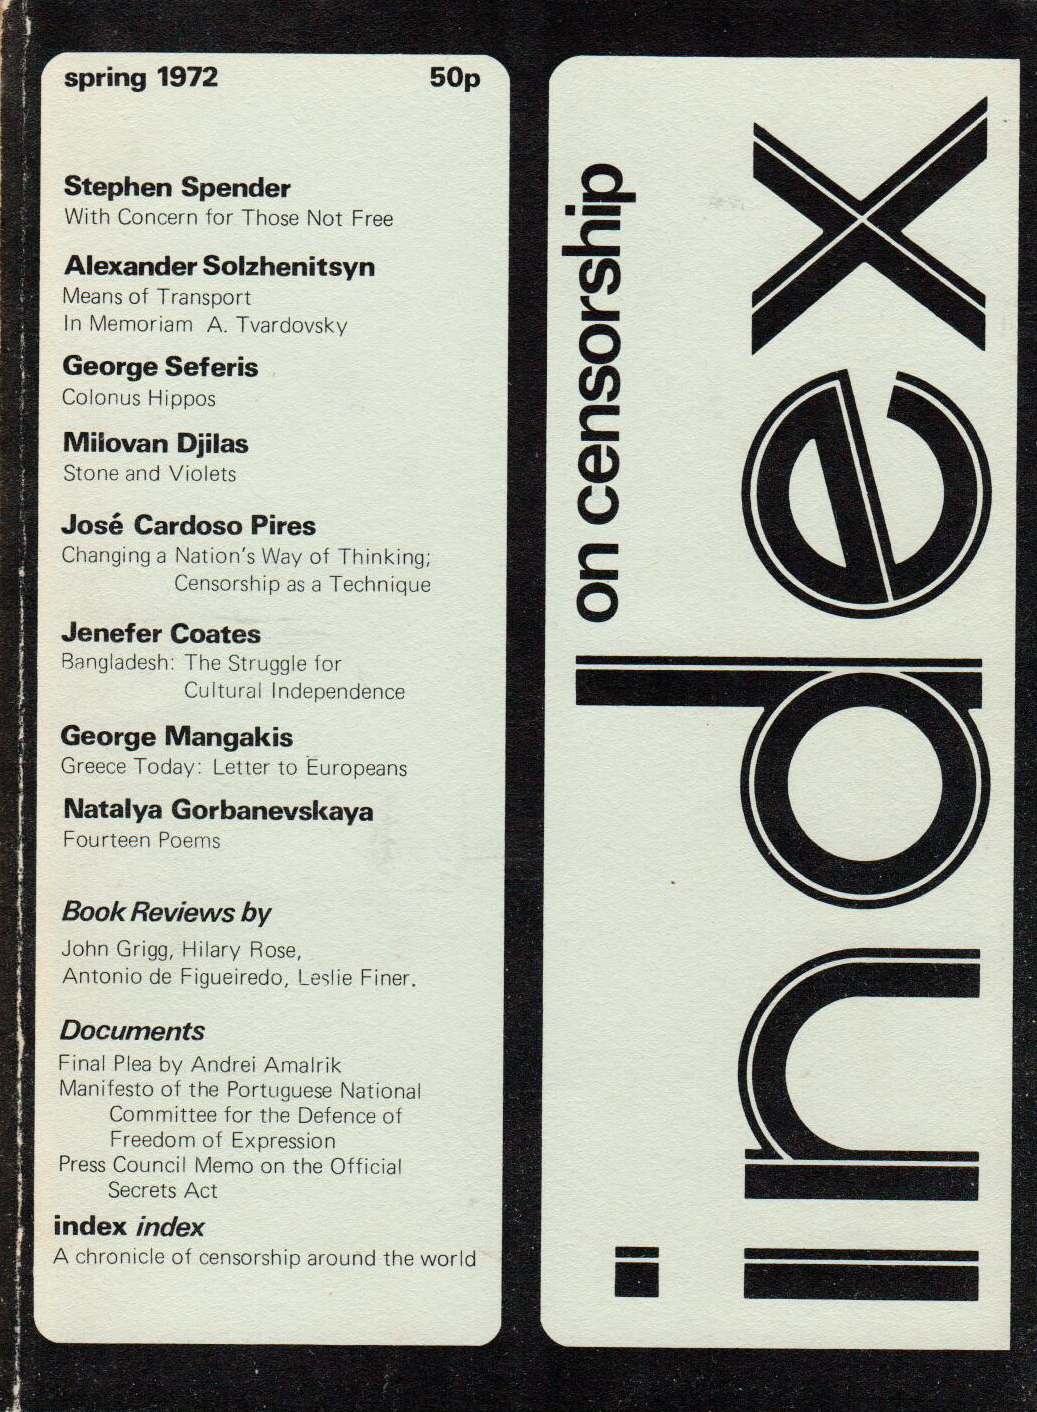 The first issue of Index on Censorship magazine, in March 1972.